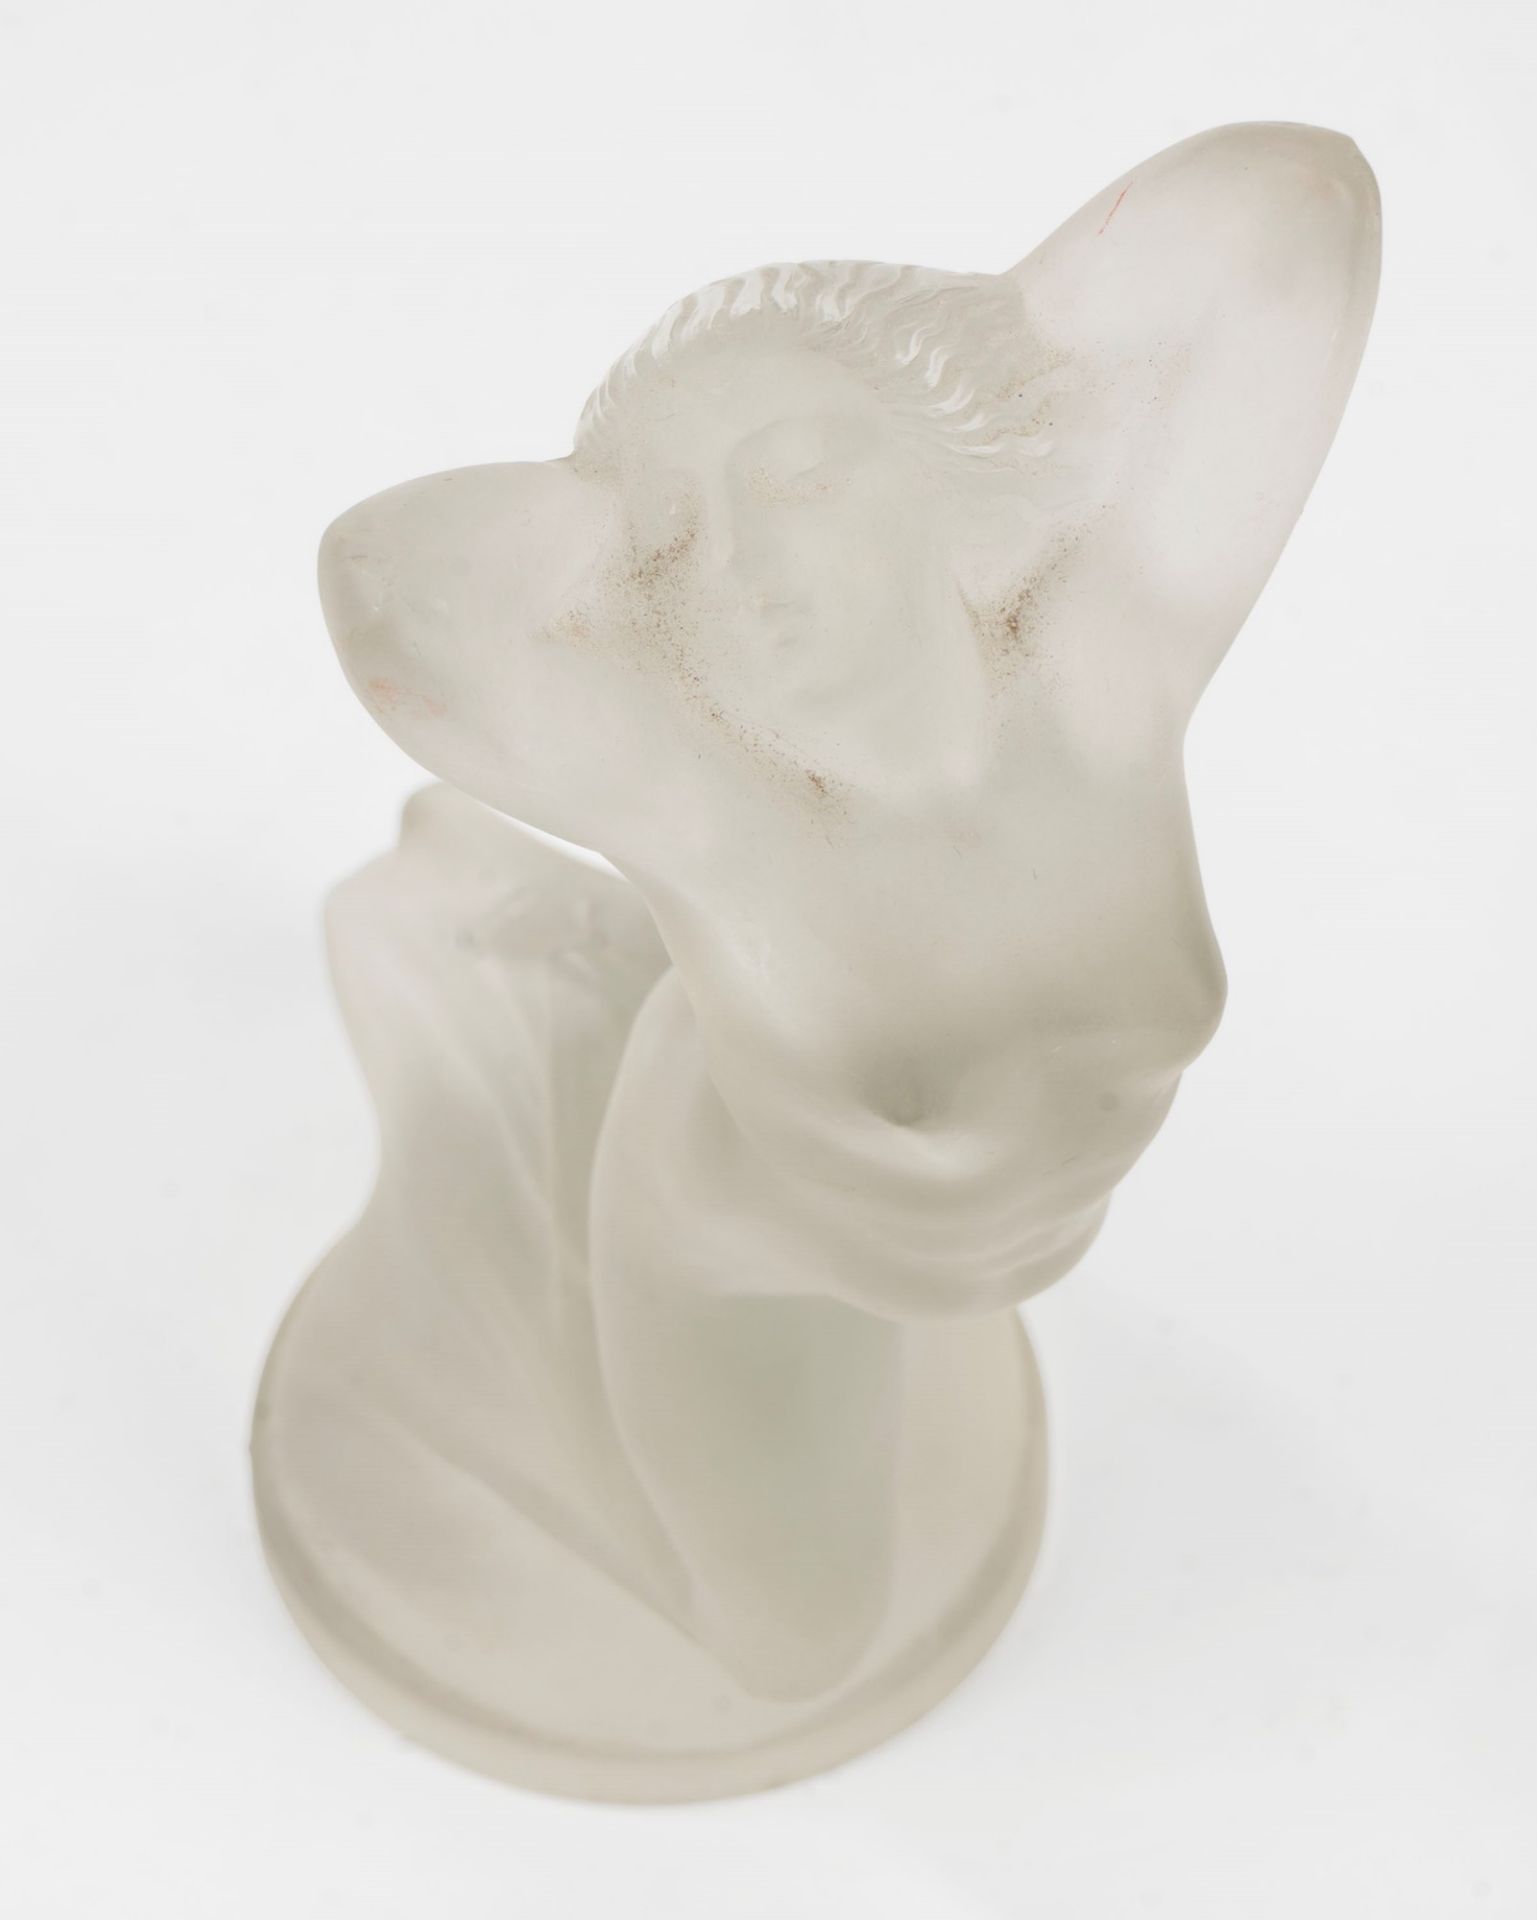 Renè Lalique - Female nude in satin crystal - Image 5 of 6